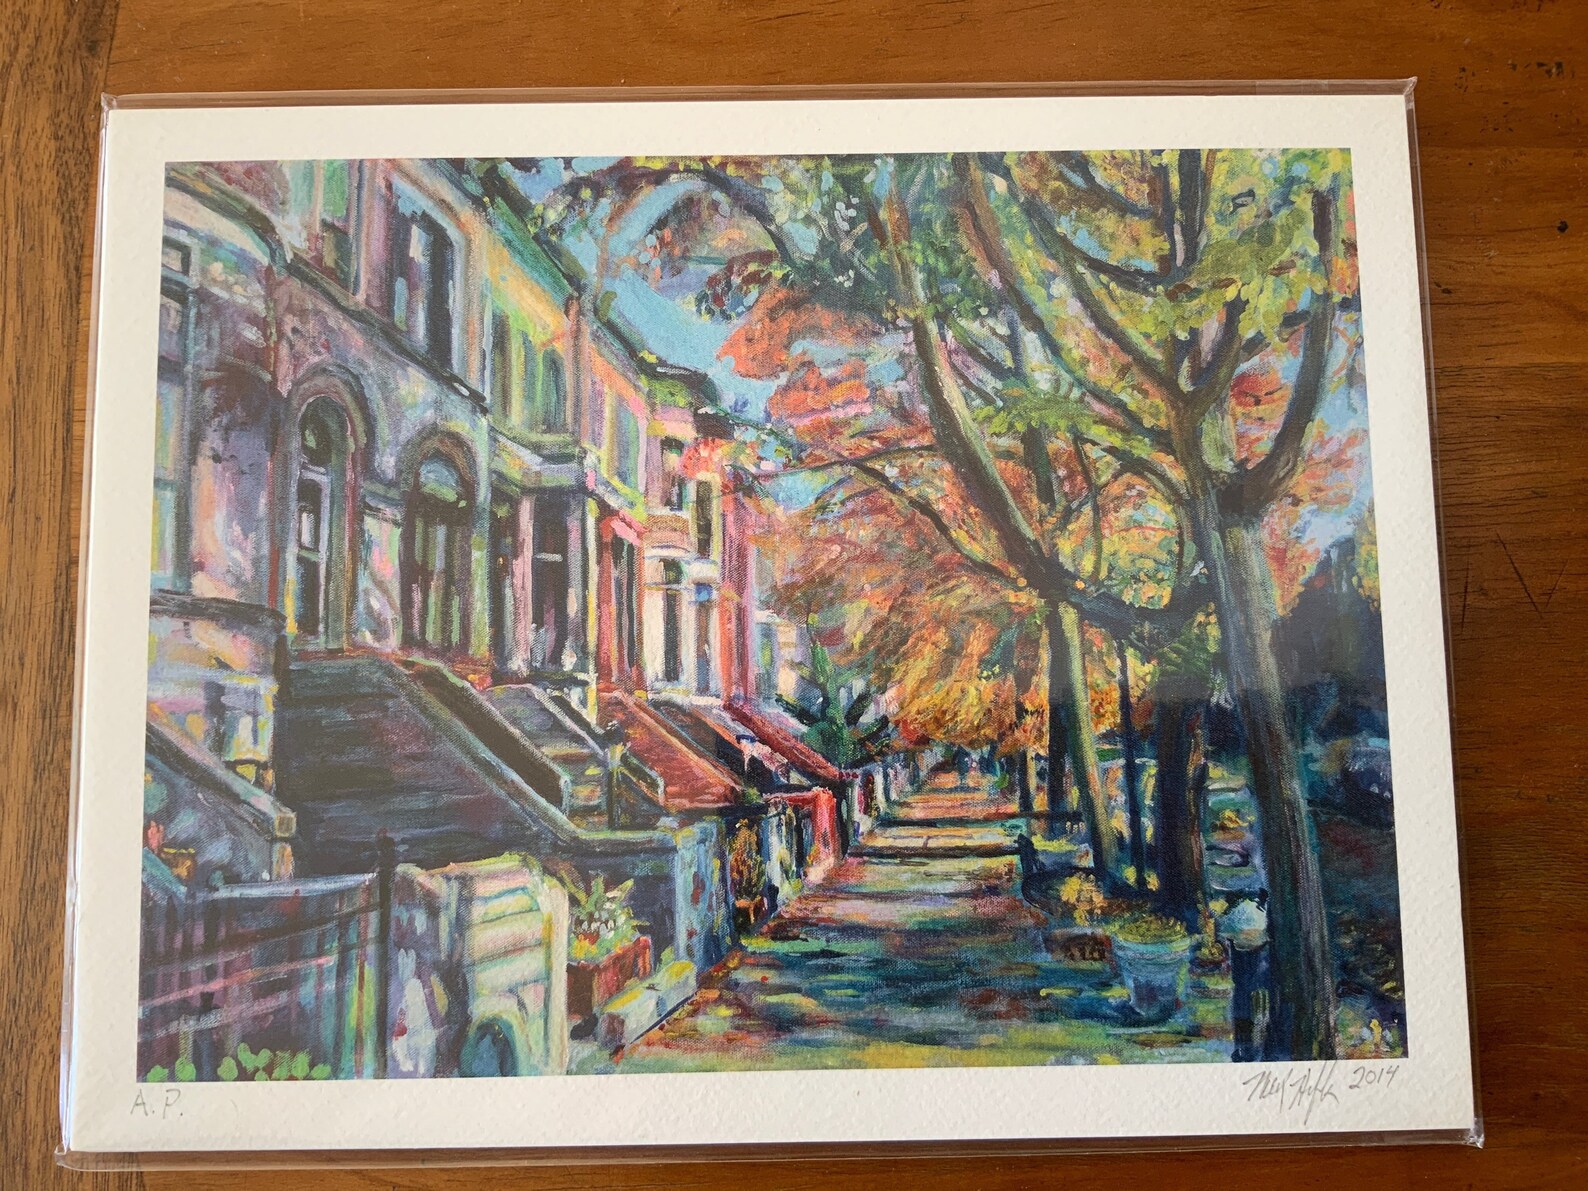 Artist proof of Midwood Street Brownstones giclee print lying face up on wooden table